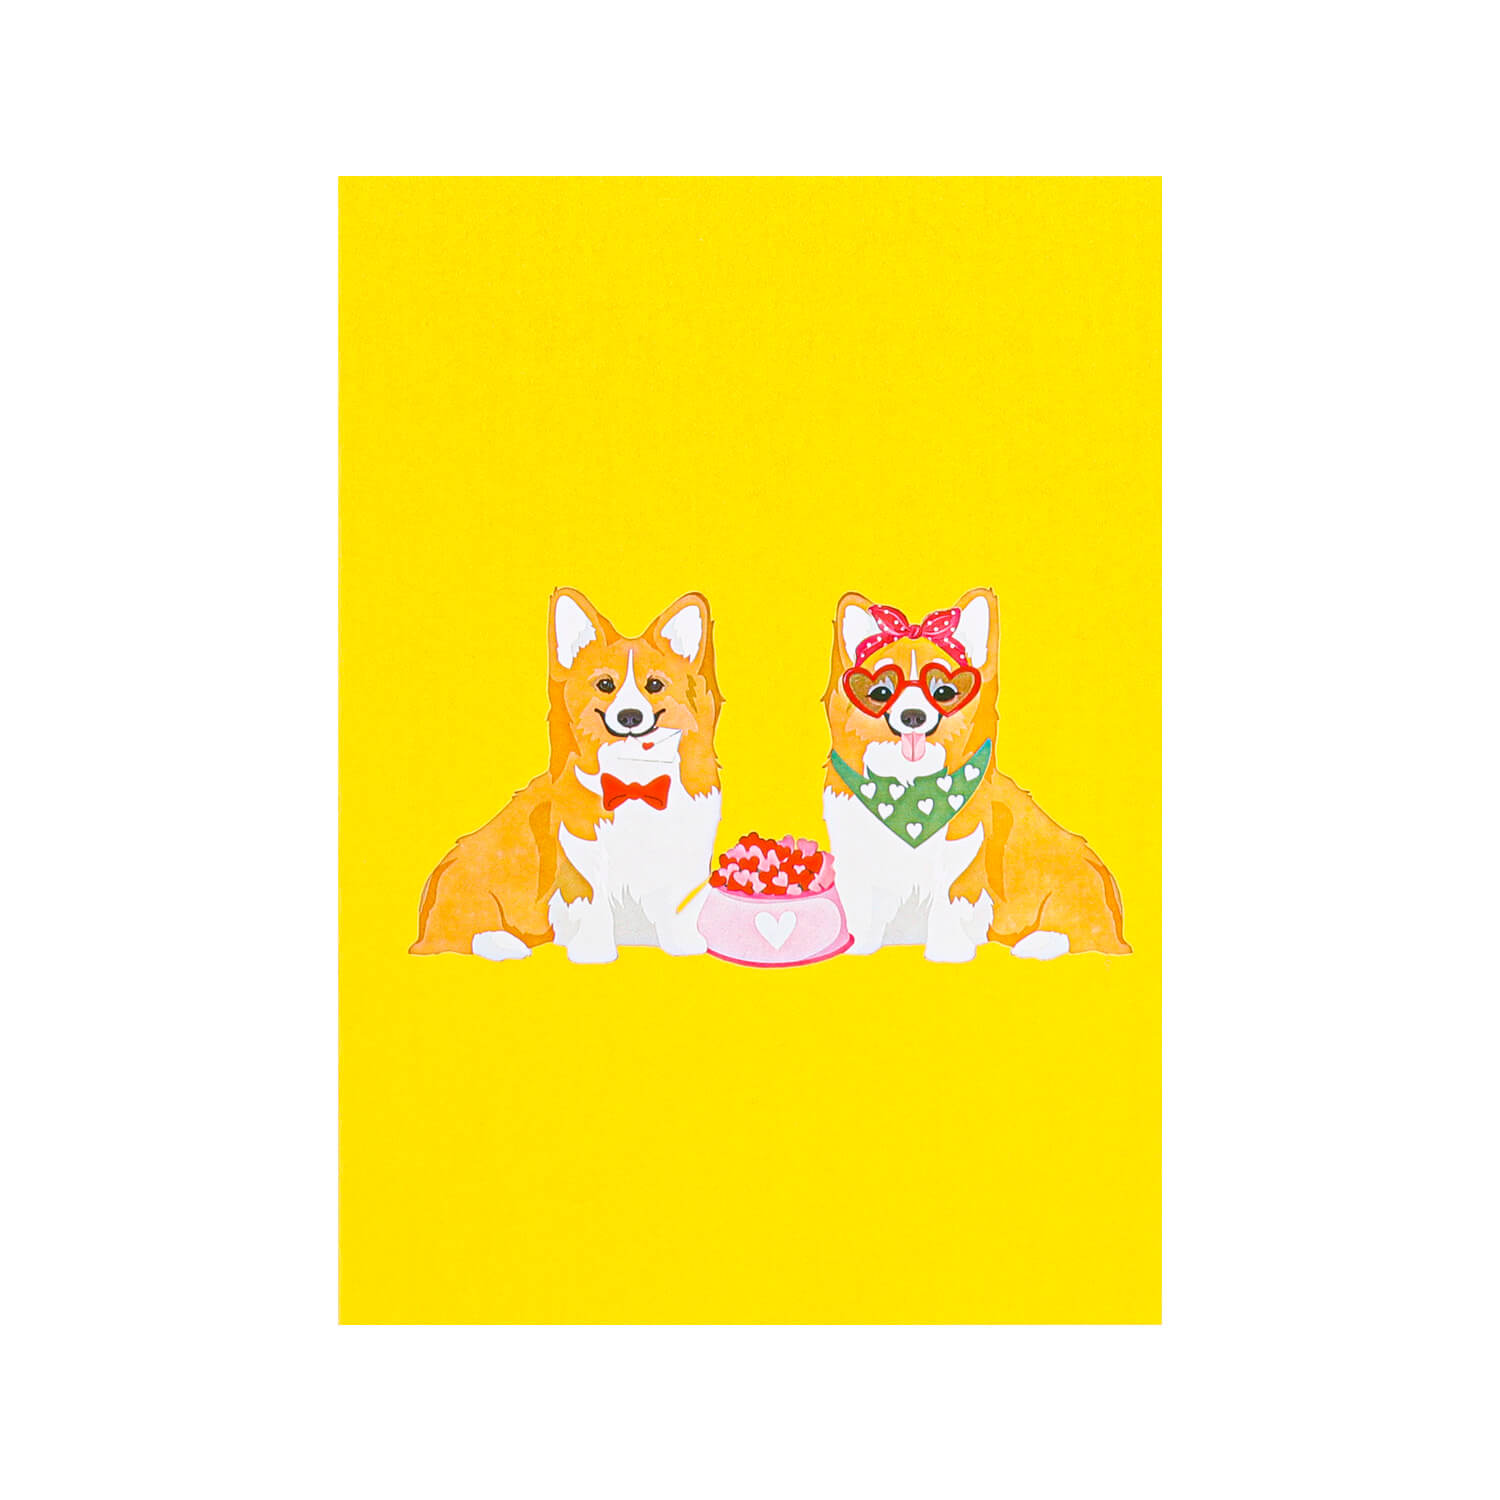 Corgi couple Pop Up Cards LV066 cover pop up card wholesale pop up card manufacturer personalised valentines cards pop up valentine cards custom birthday cards custom thank you cards pop up greeting cards wholesale pop up card suppliers 3d greeting card wholesale 3d pop up card wholesale pop up card supplies animal pop up card